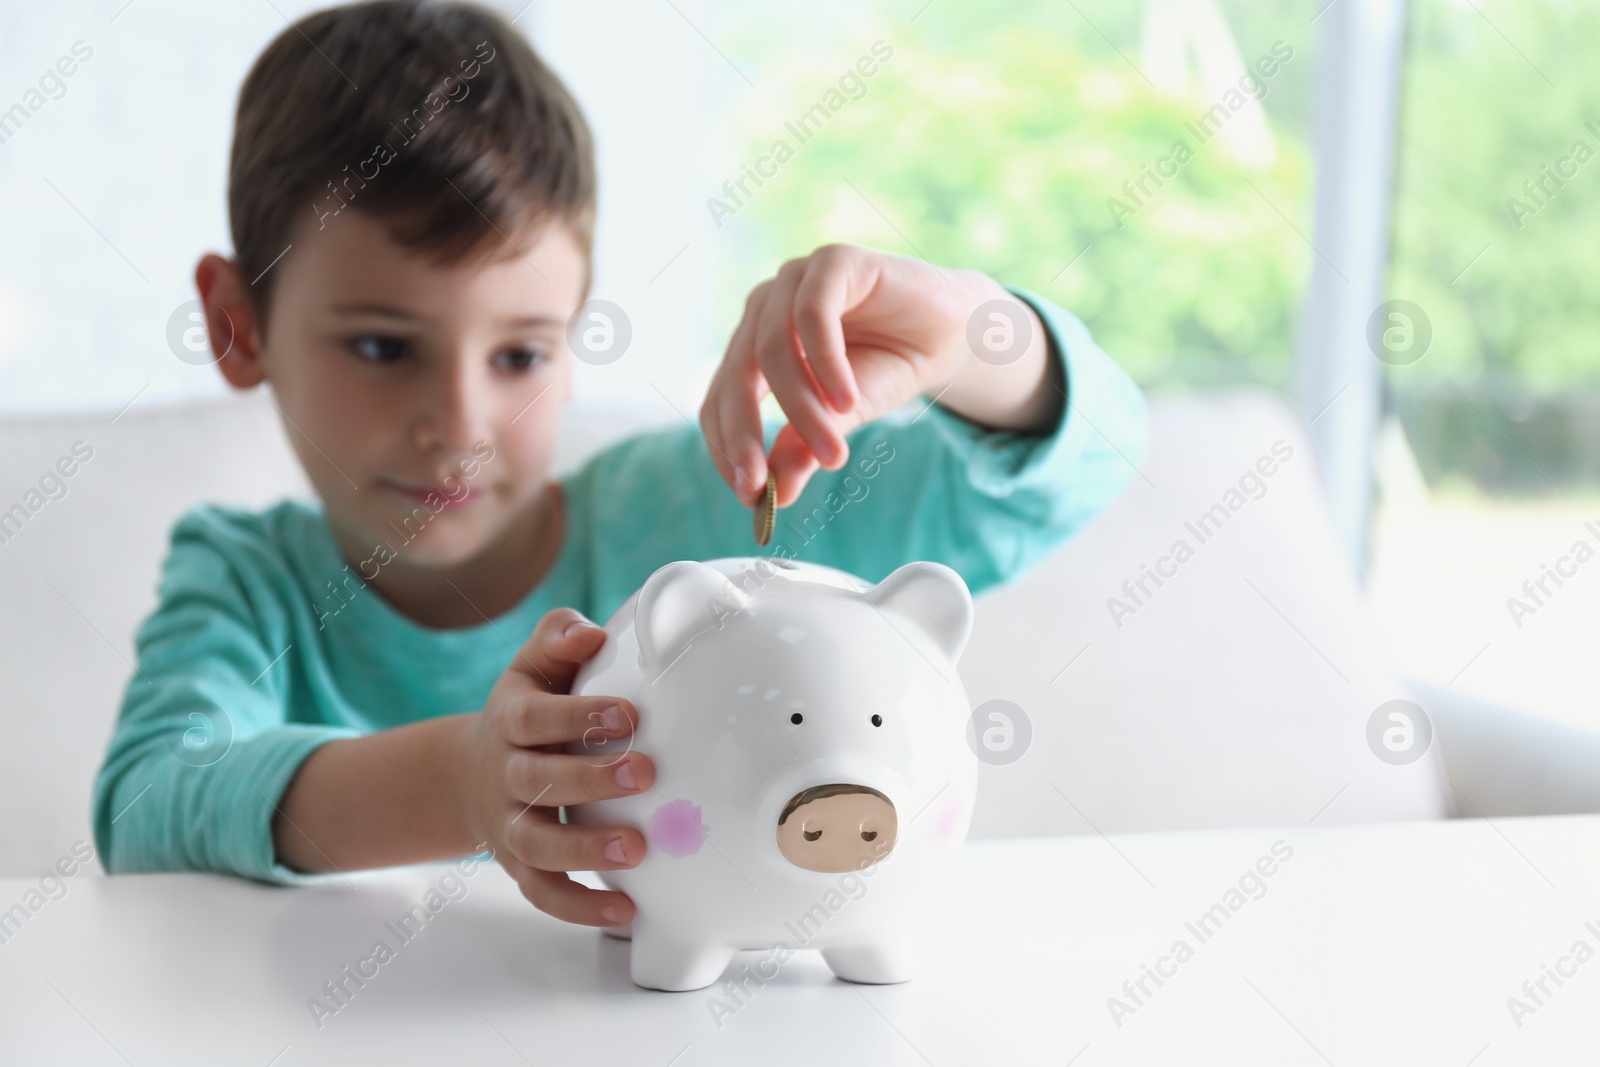 Photo of Little boy putting coin into piggy bank at white table indoors